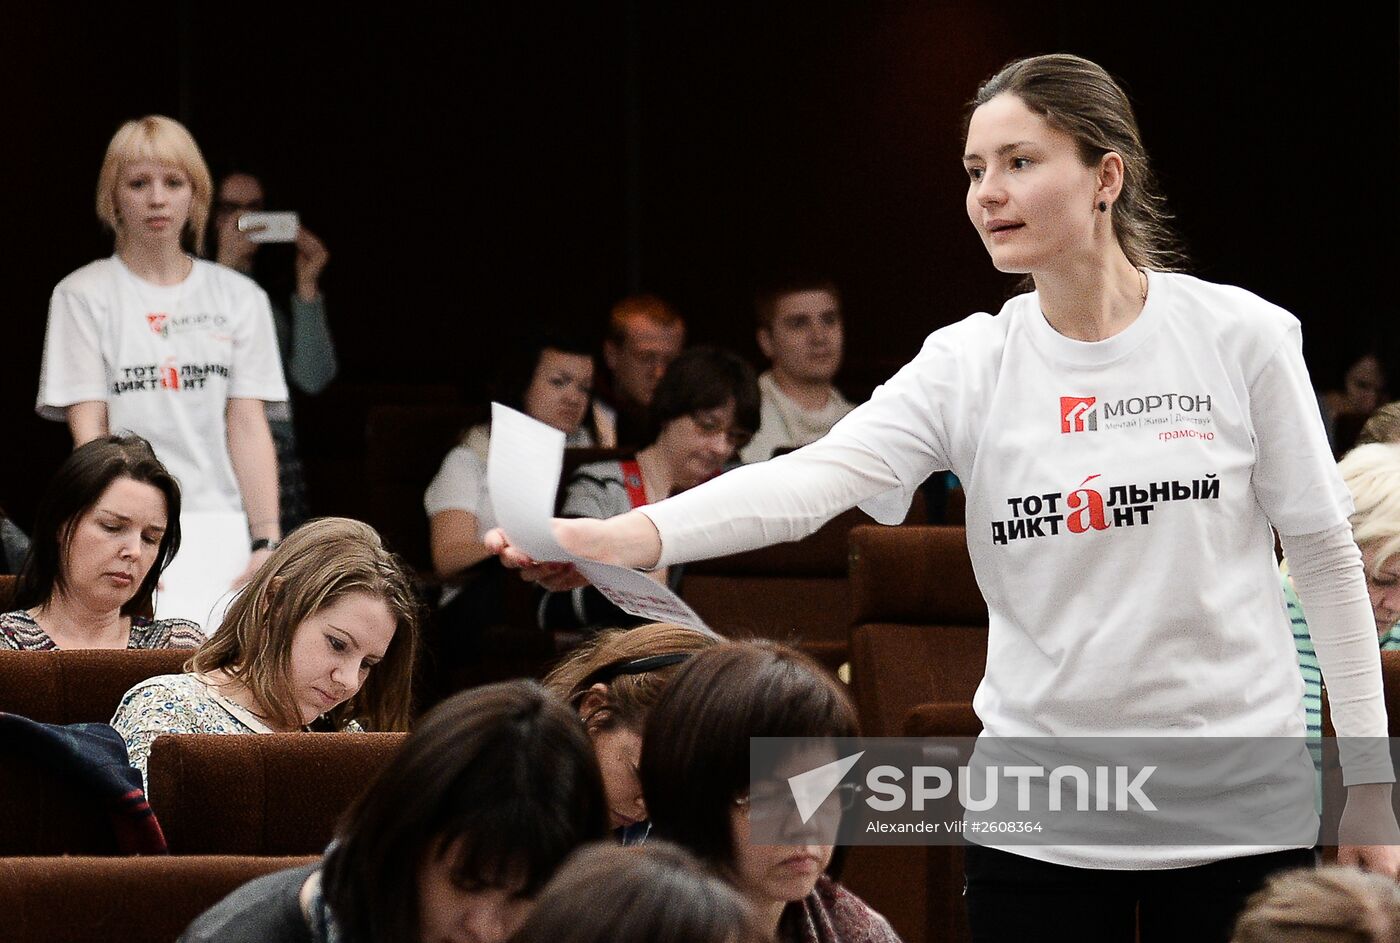 Total Dictation 2015 international literacy event in Moscow